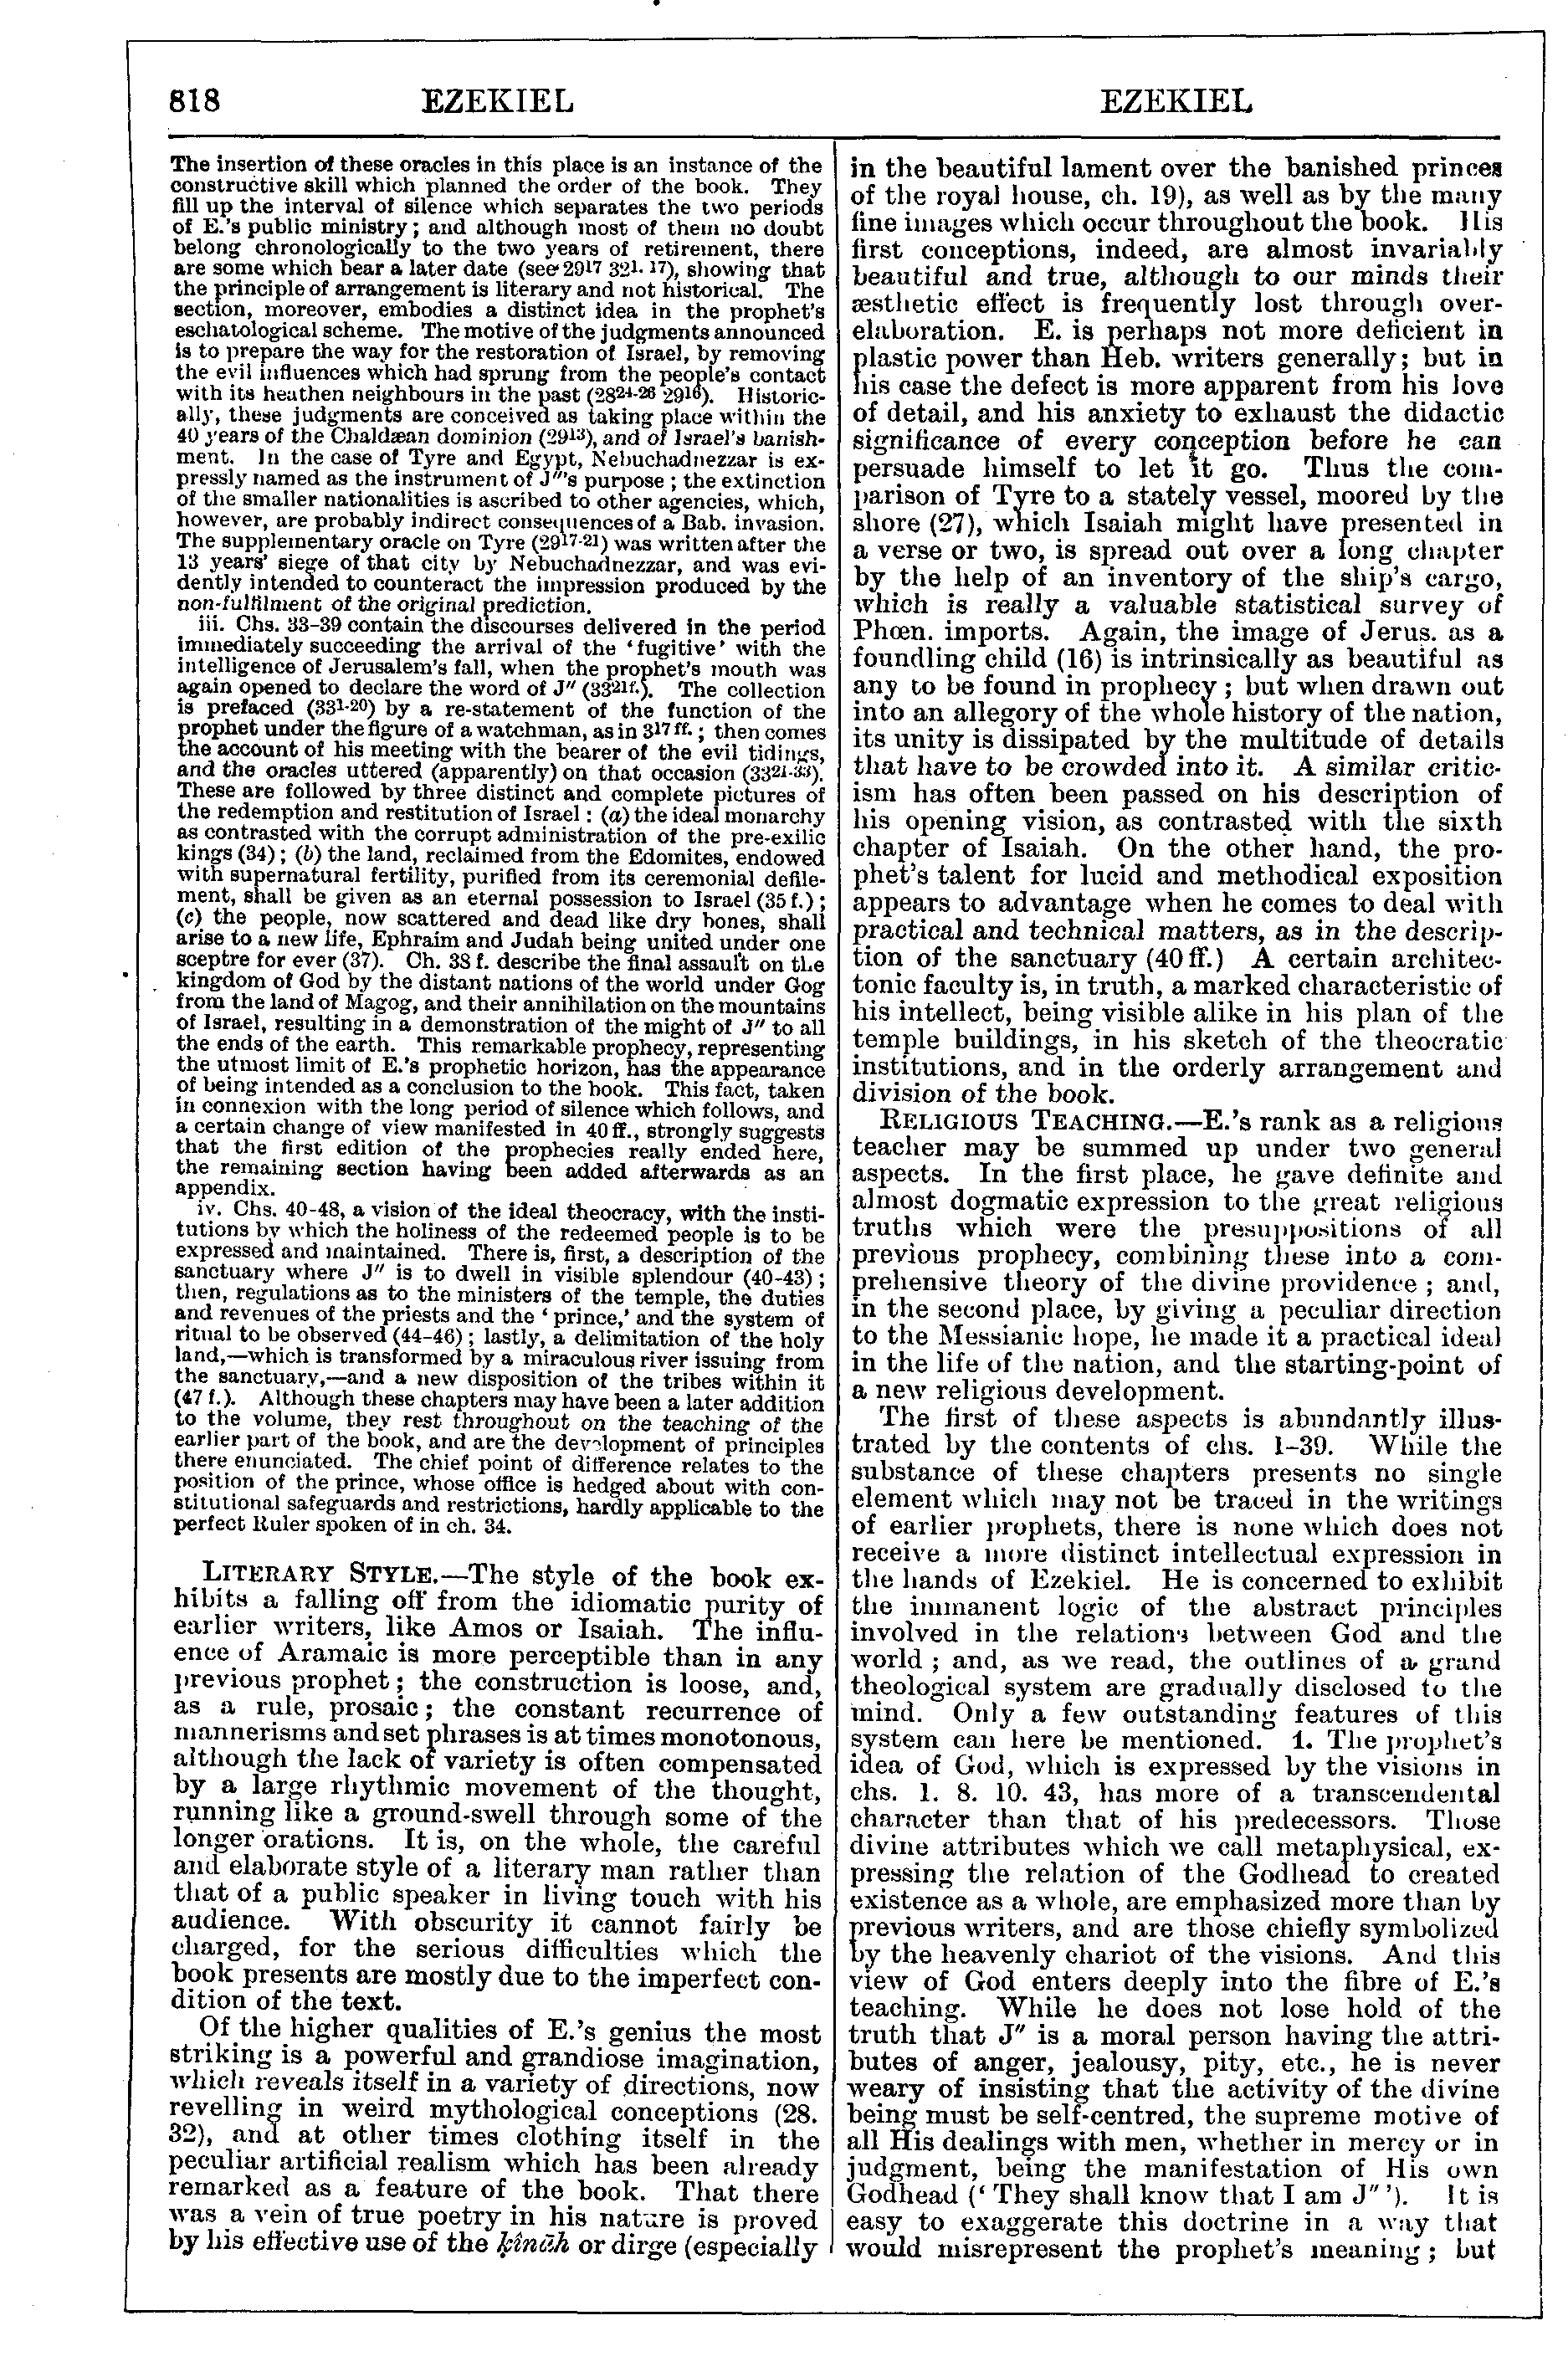 Image of page 818